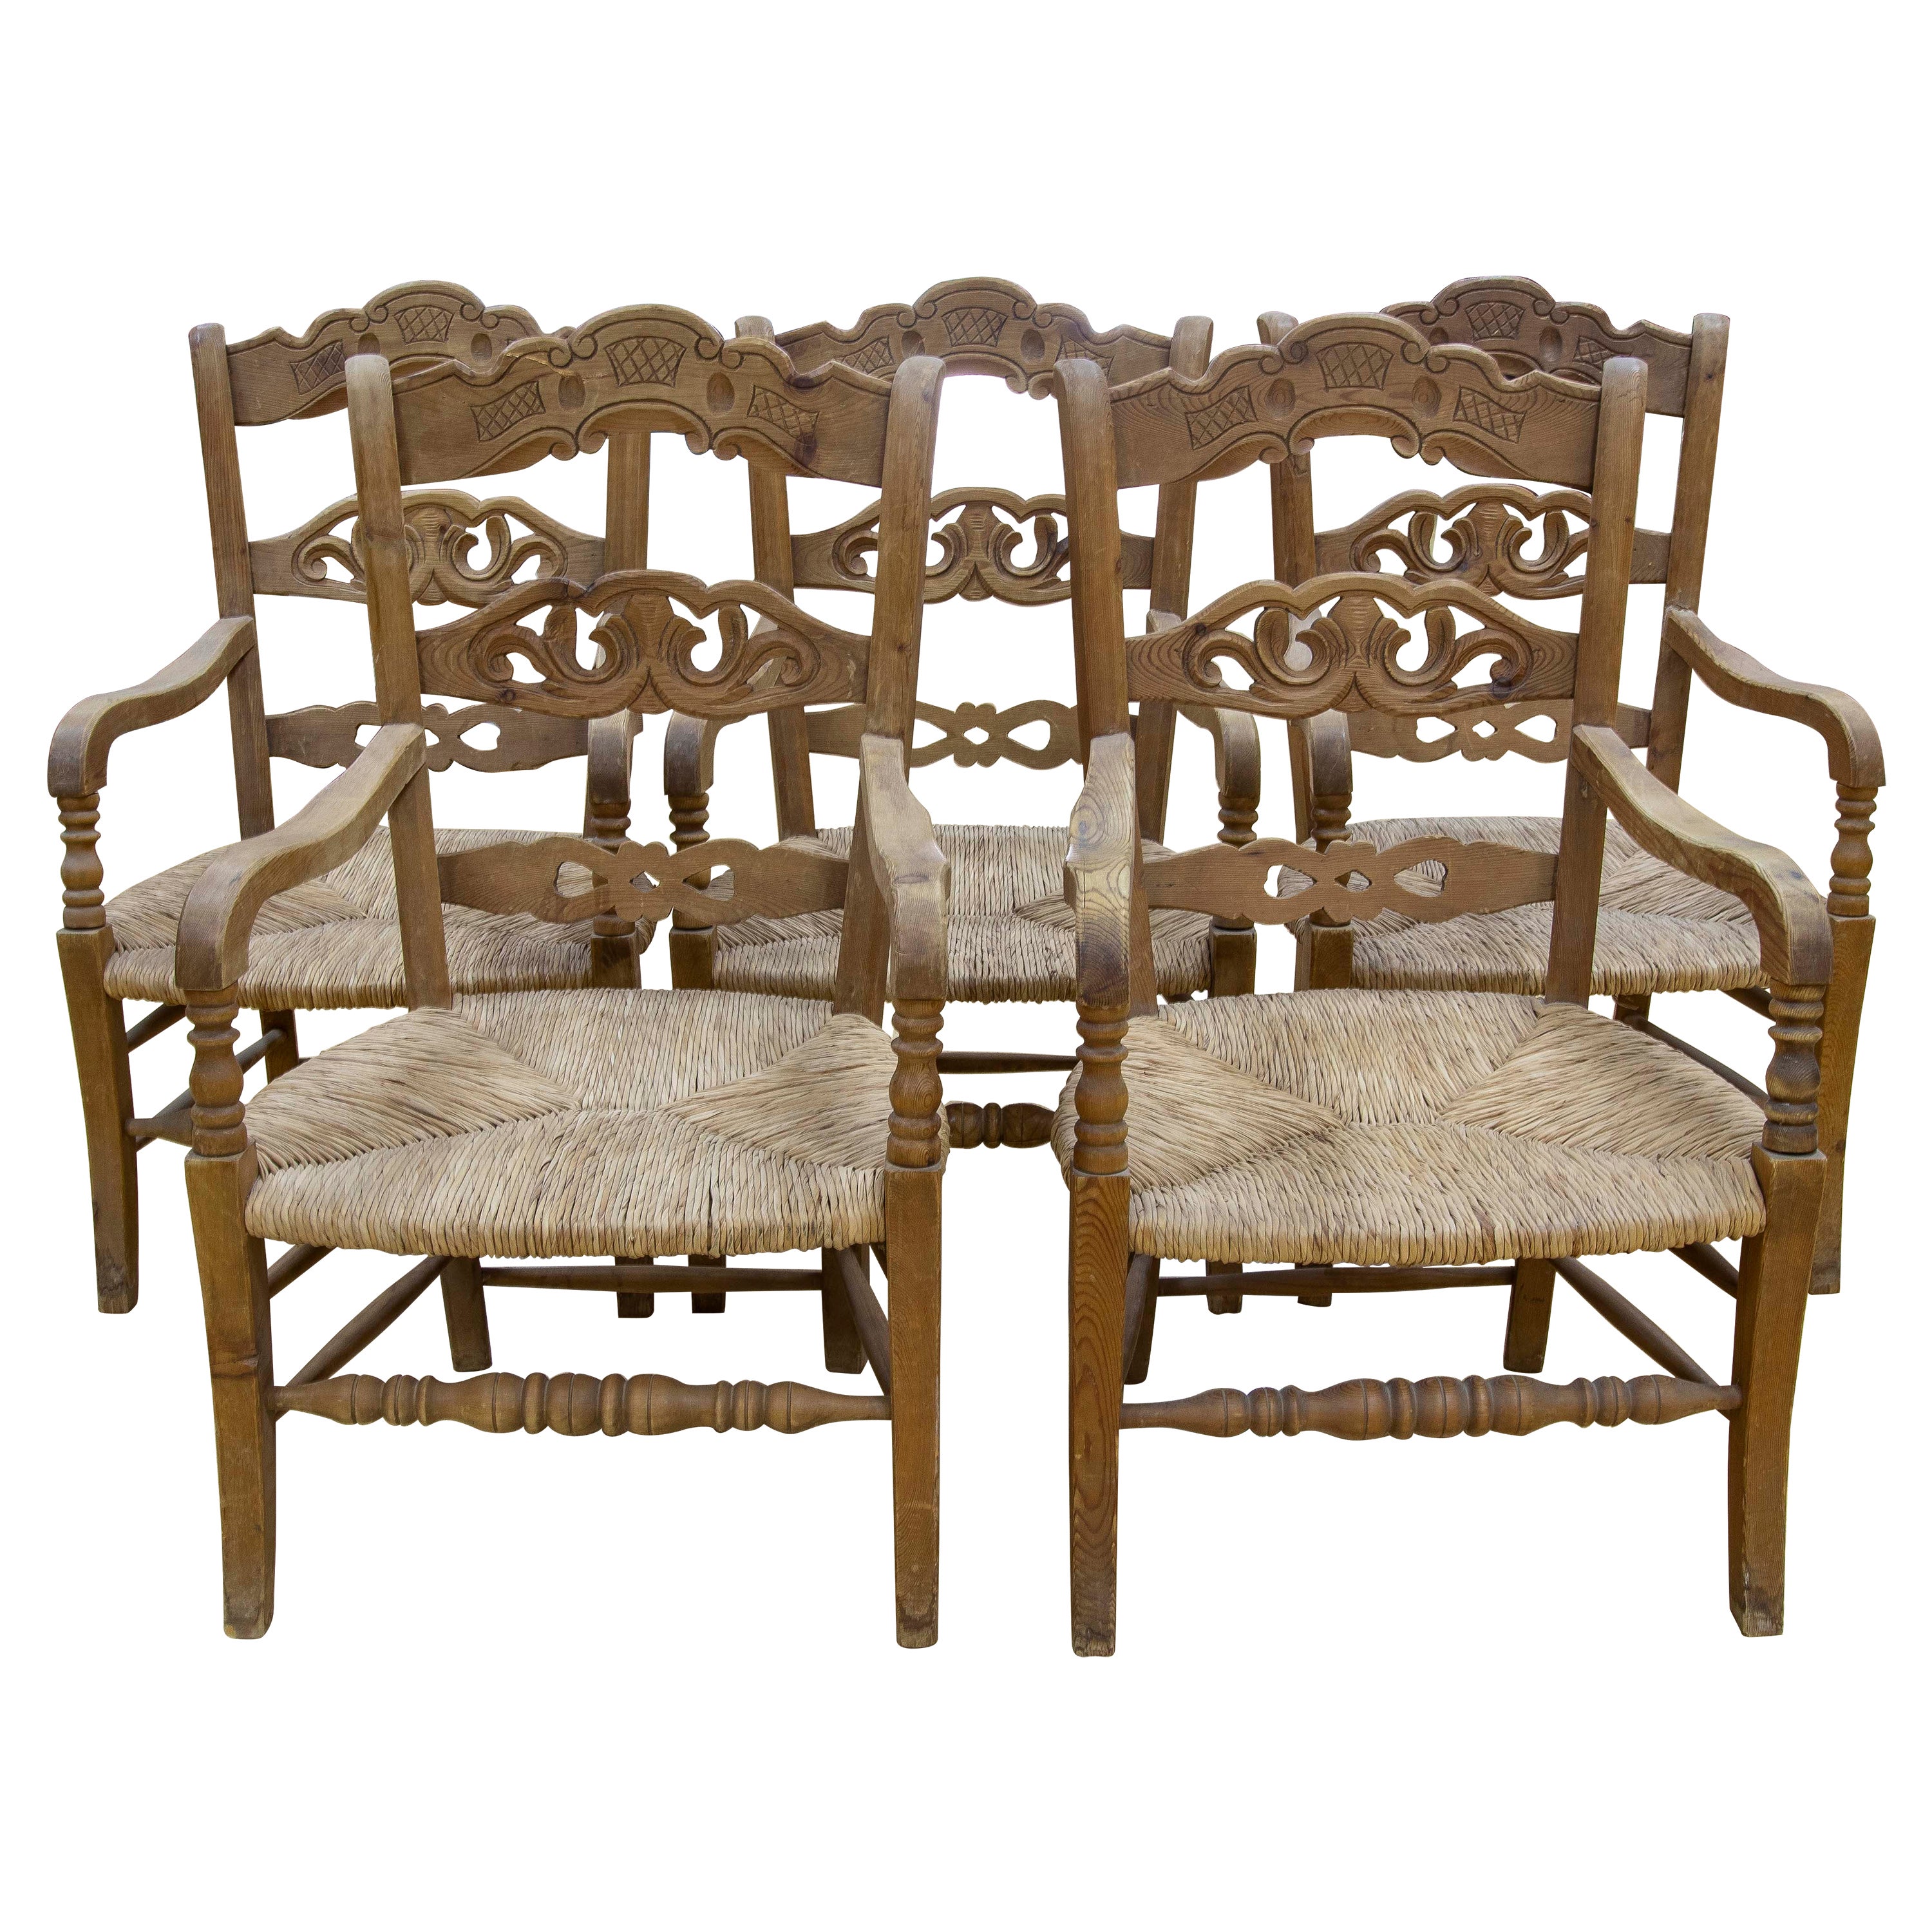 Spanish Set of Five Carved Rustic Wooden Chairs Made of Wood and Bulrush